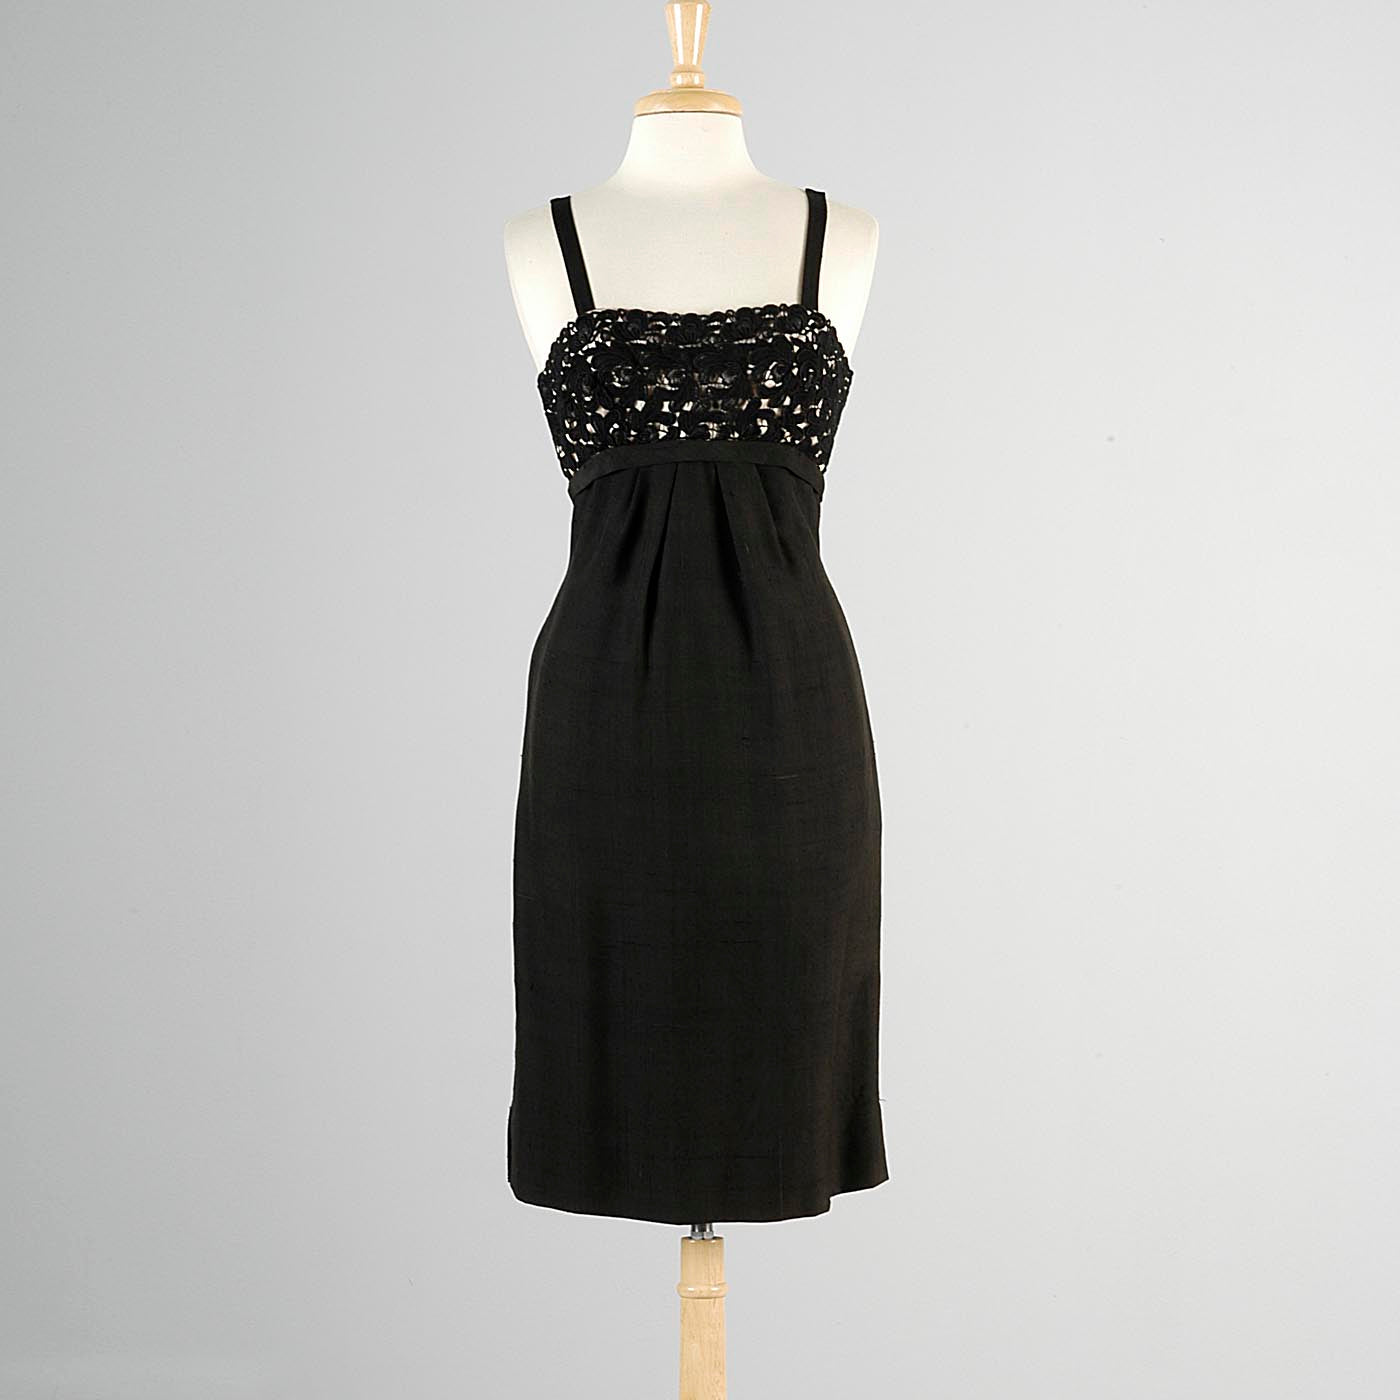 1950s Black Silk Dress with Illusion Bust